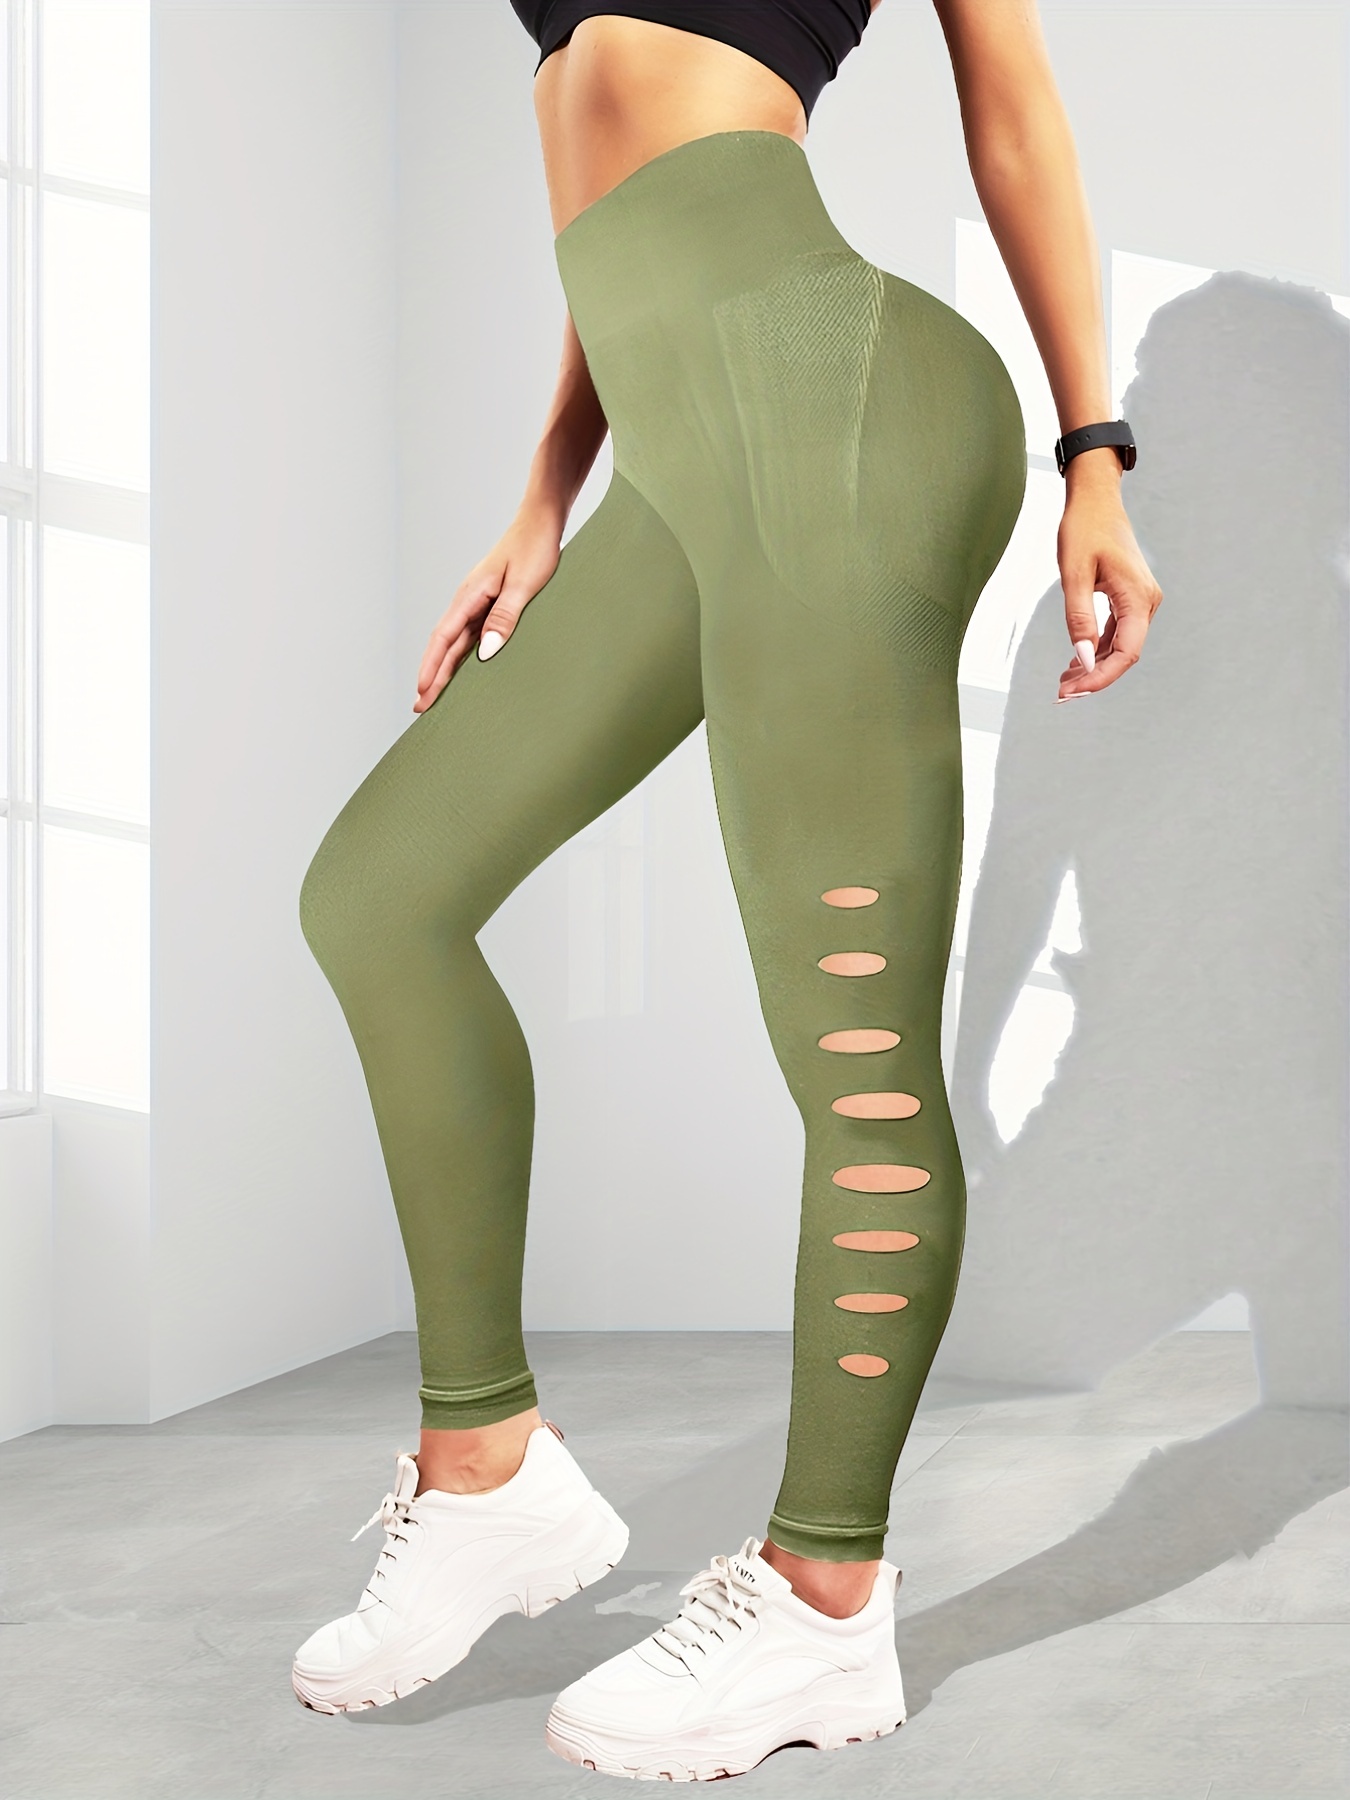 Women Yoga Leggings with Pockets High Waist Compression Workout